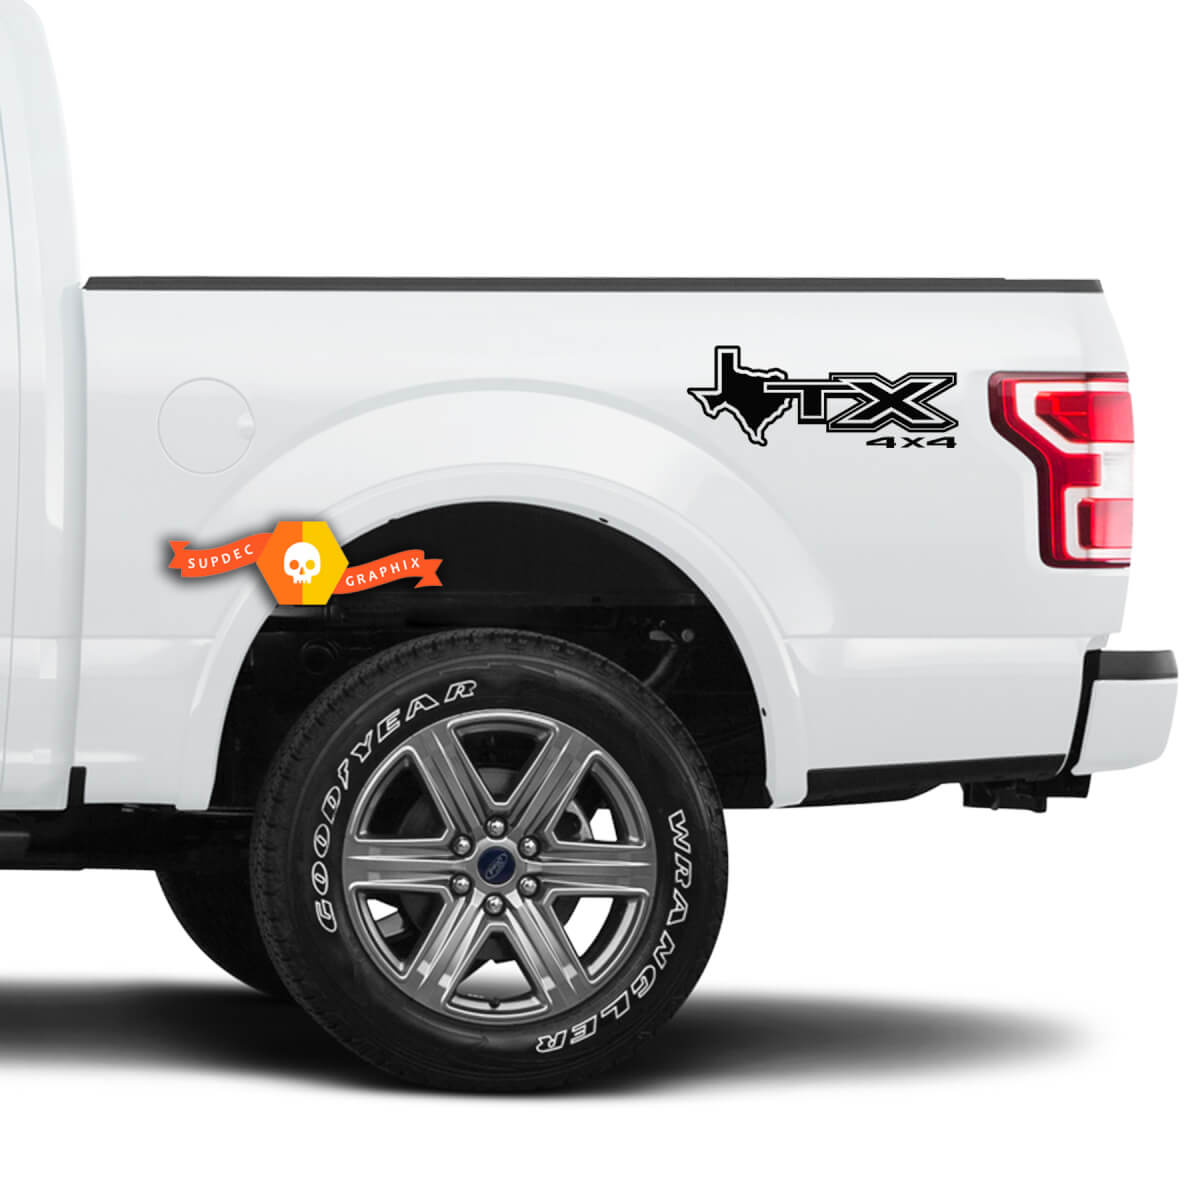 Pair STX Texas 4X4 Mountain Decals For Ford F150 F250 F350 Super Duty Truck Sticker Decal Vinyl
